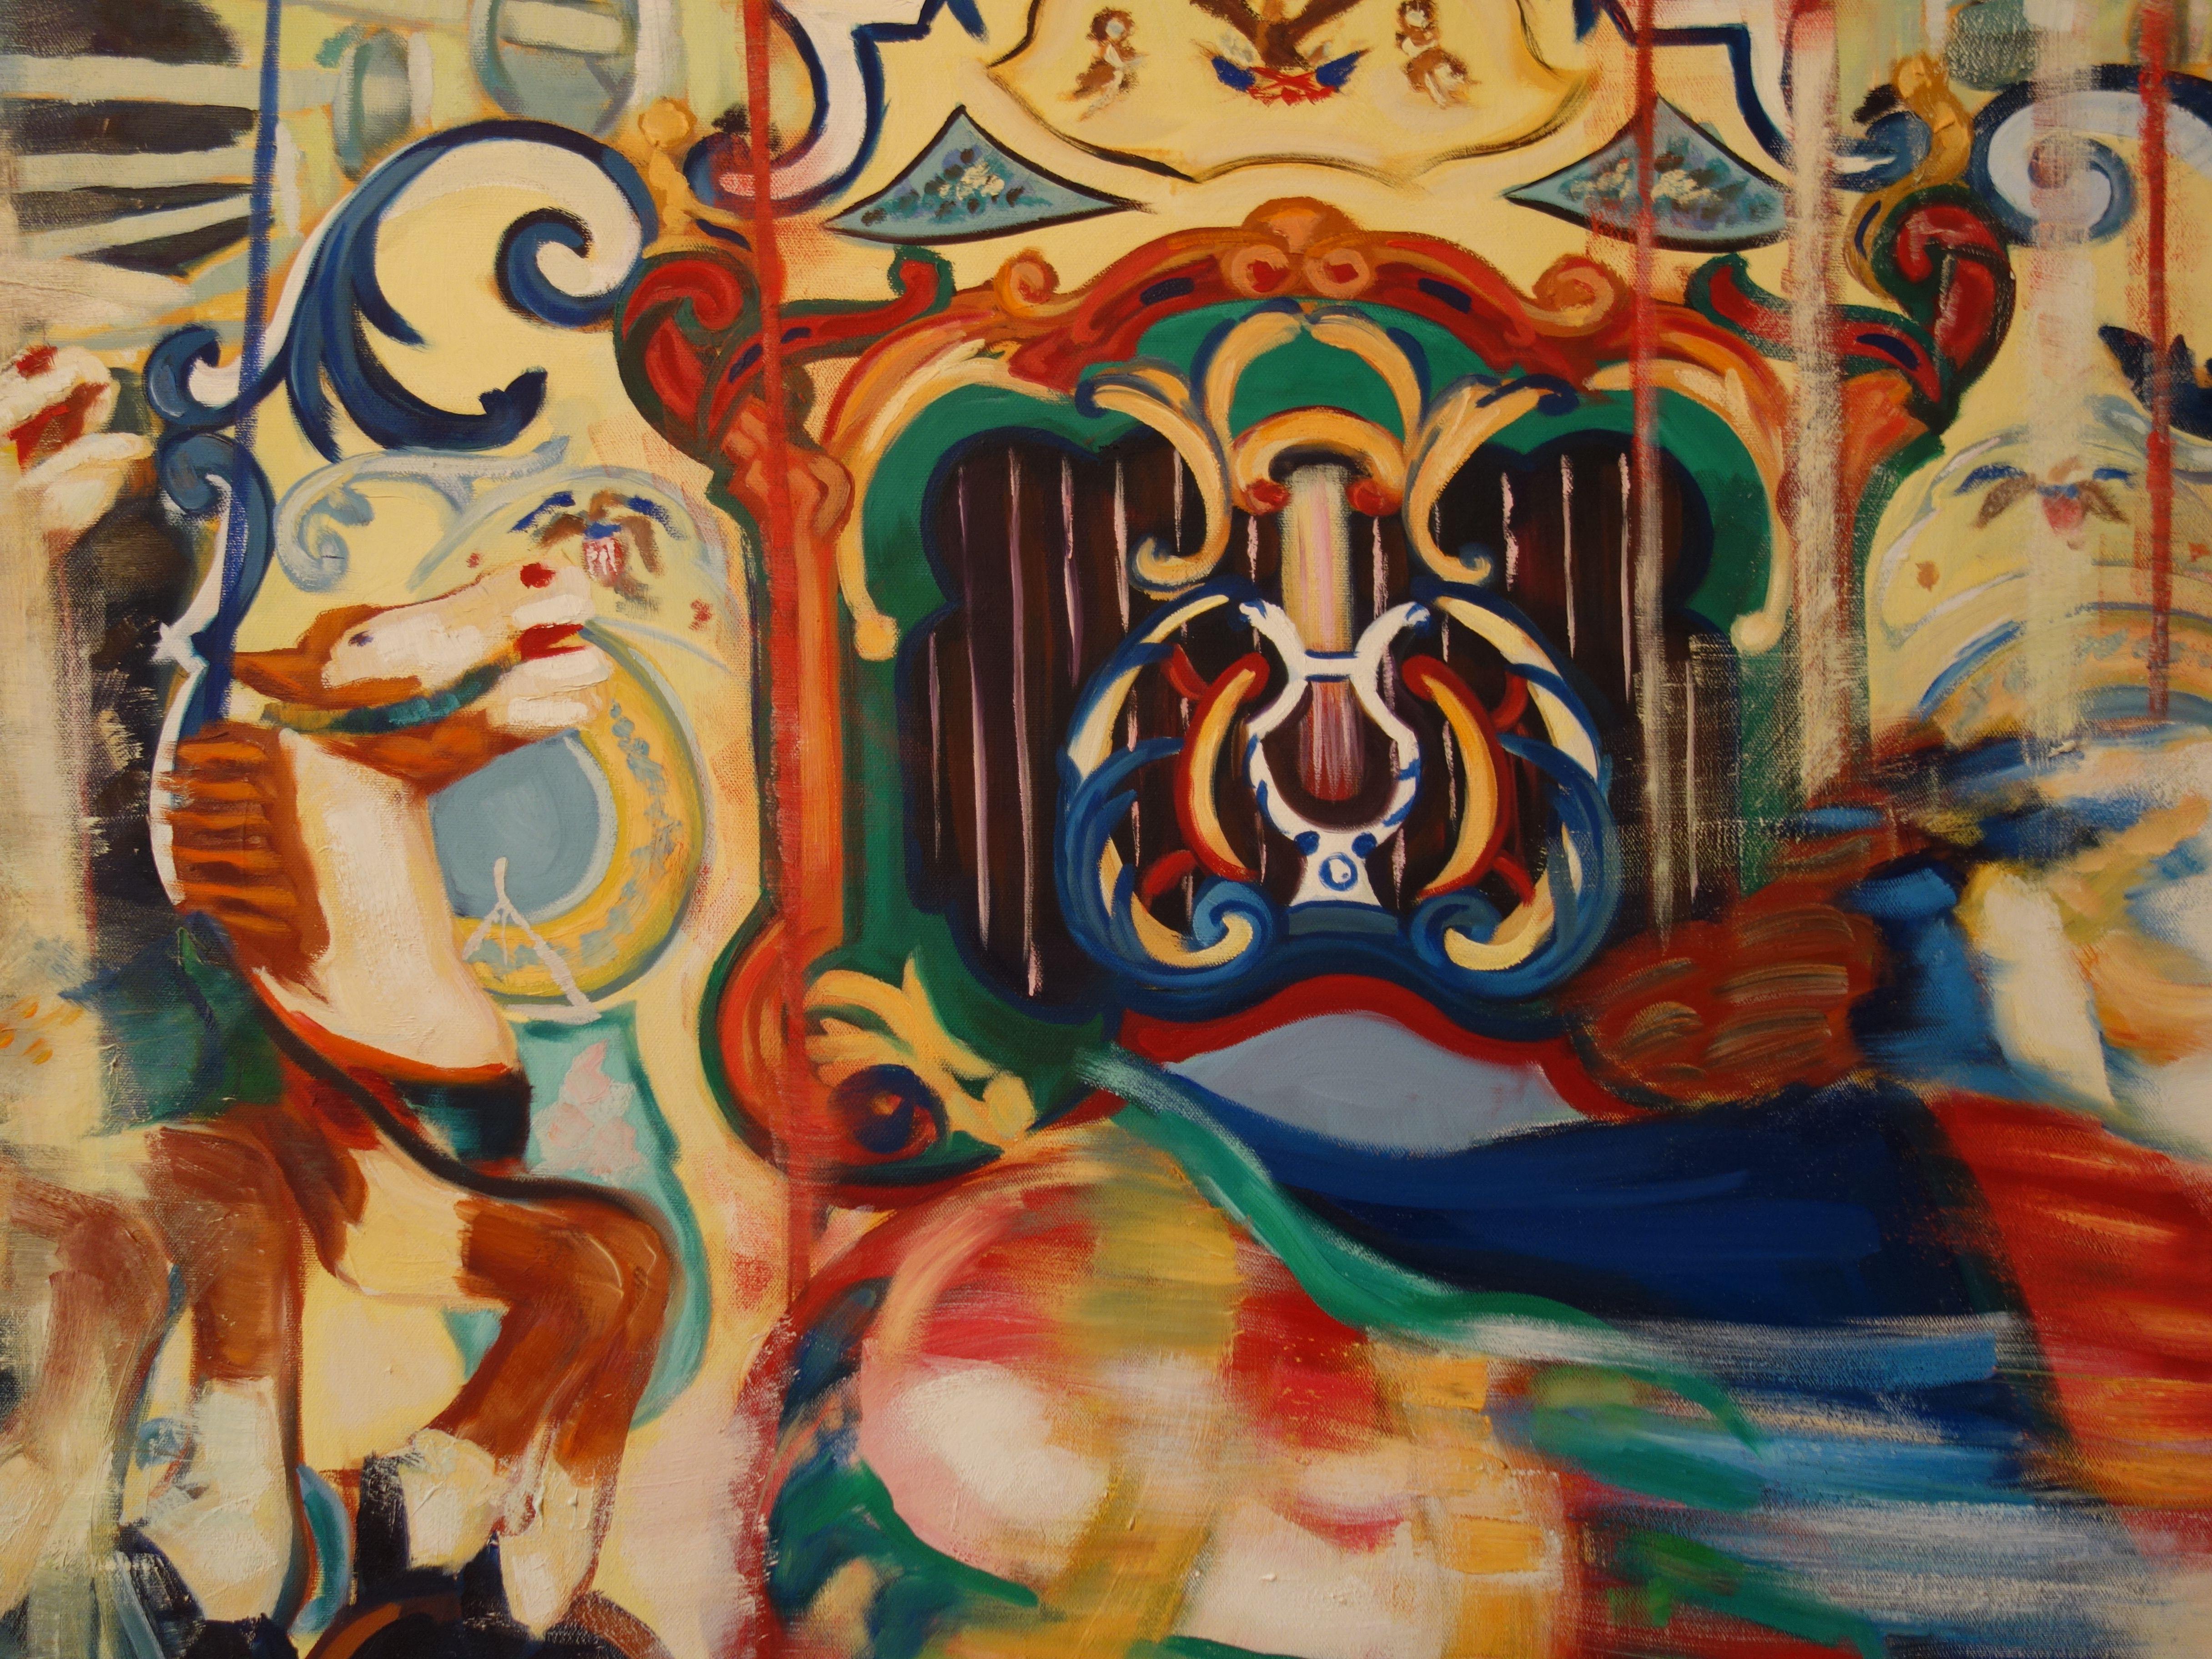 The glorious colorful carousel at Coney Island in Brooklyn inspired this vibrant painting of the carousel horses in motion! The iconic historical amusement ride has always been my favorite and was an absolute joy to paint! The carousel continues to